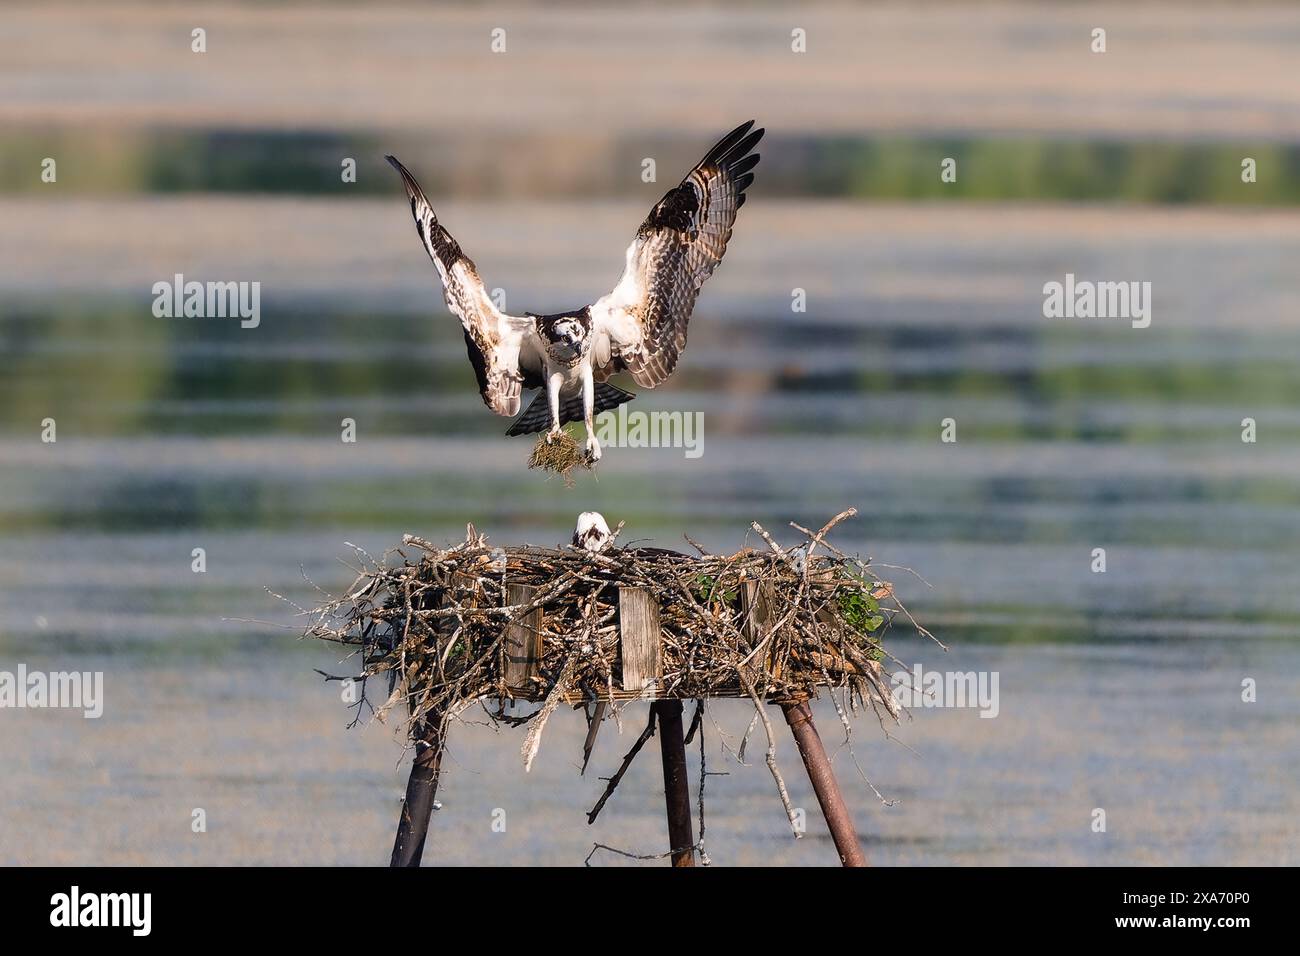 An osprey gracefully lands in a nest with wings outstretched. Stock Photo